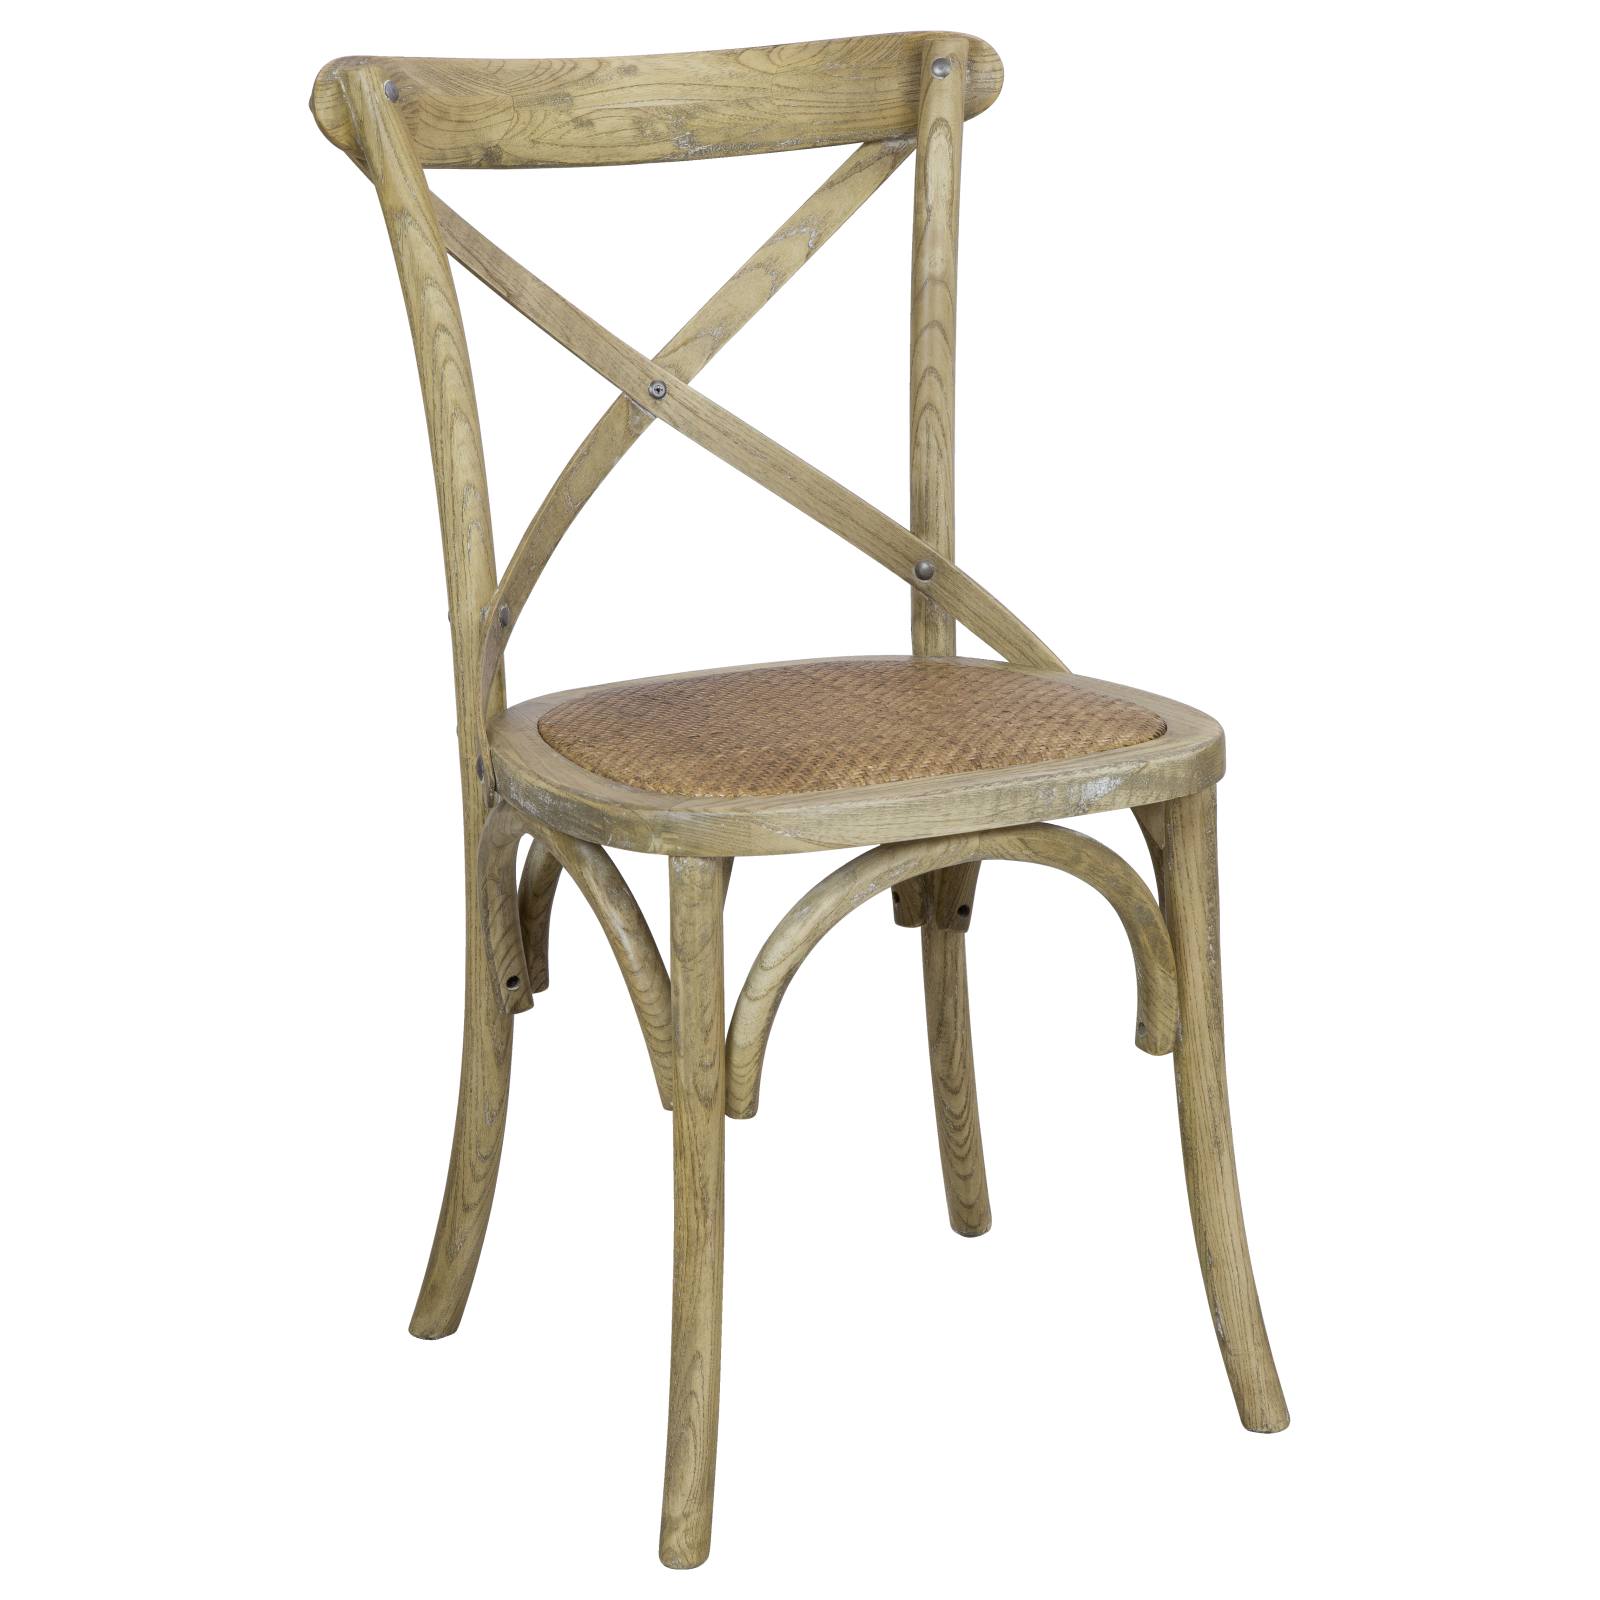 Charlotte Wooden X-Back Chair